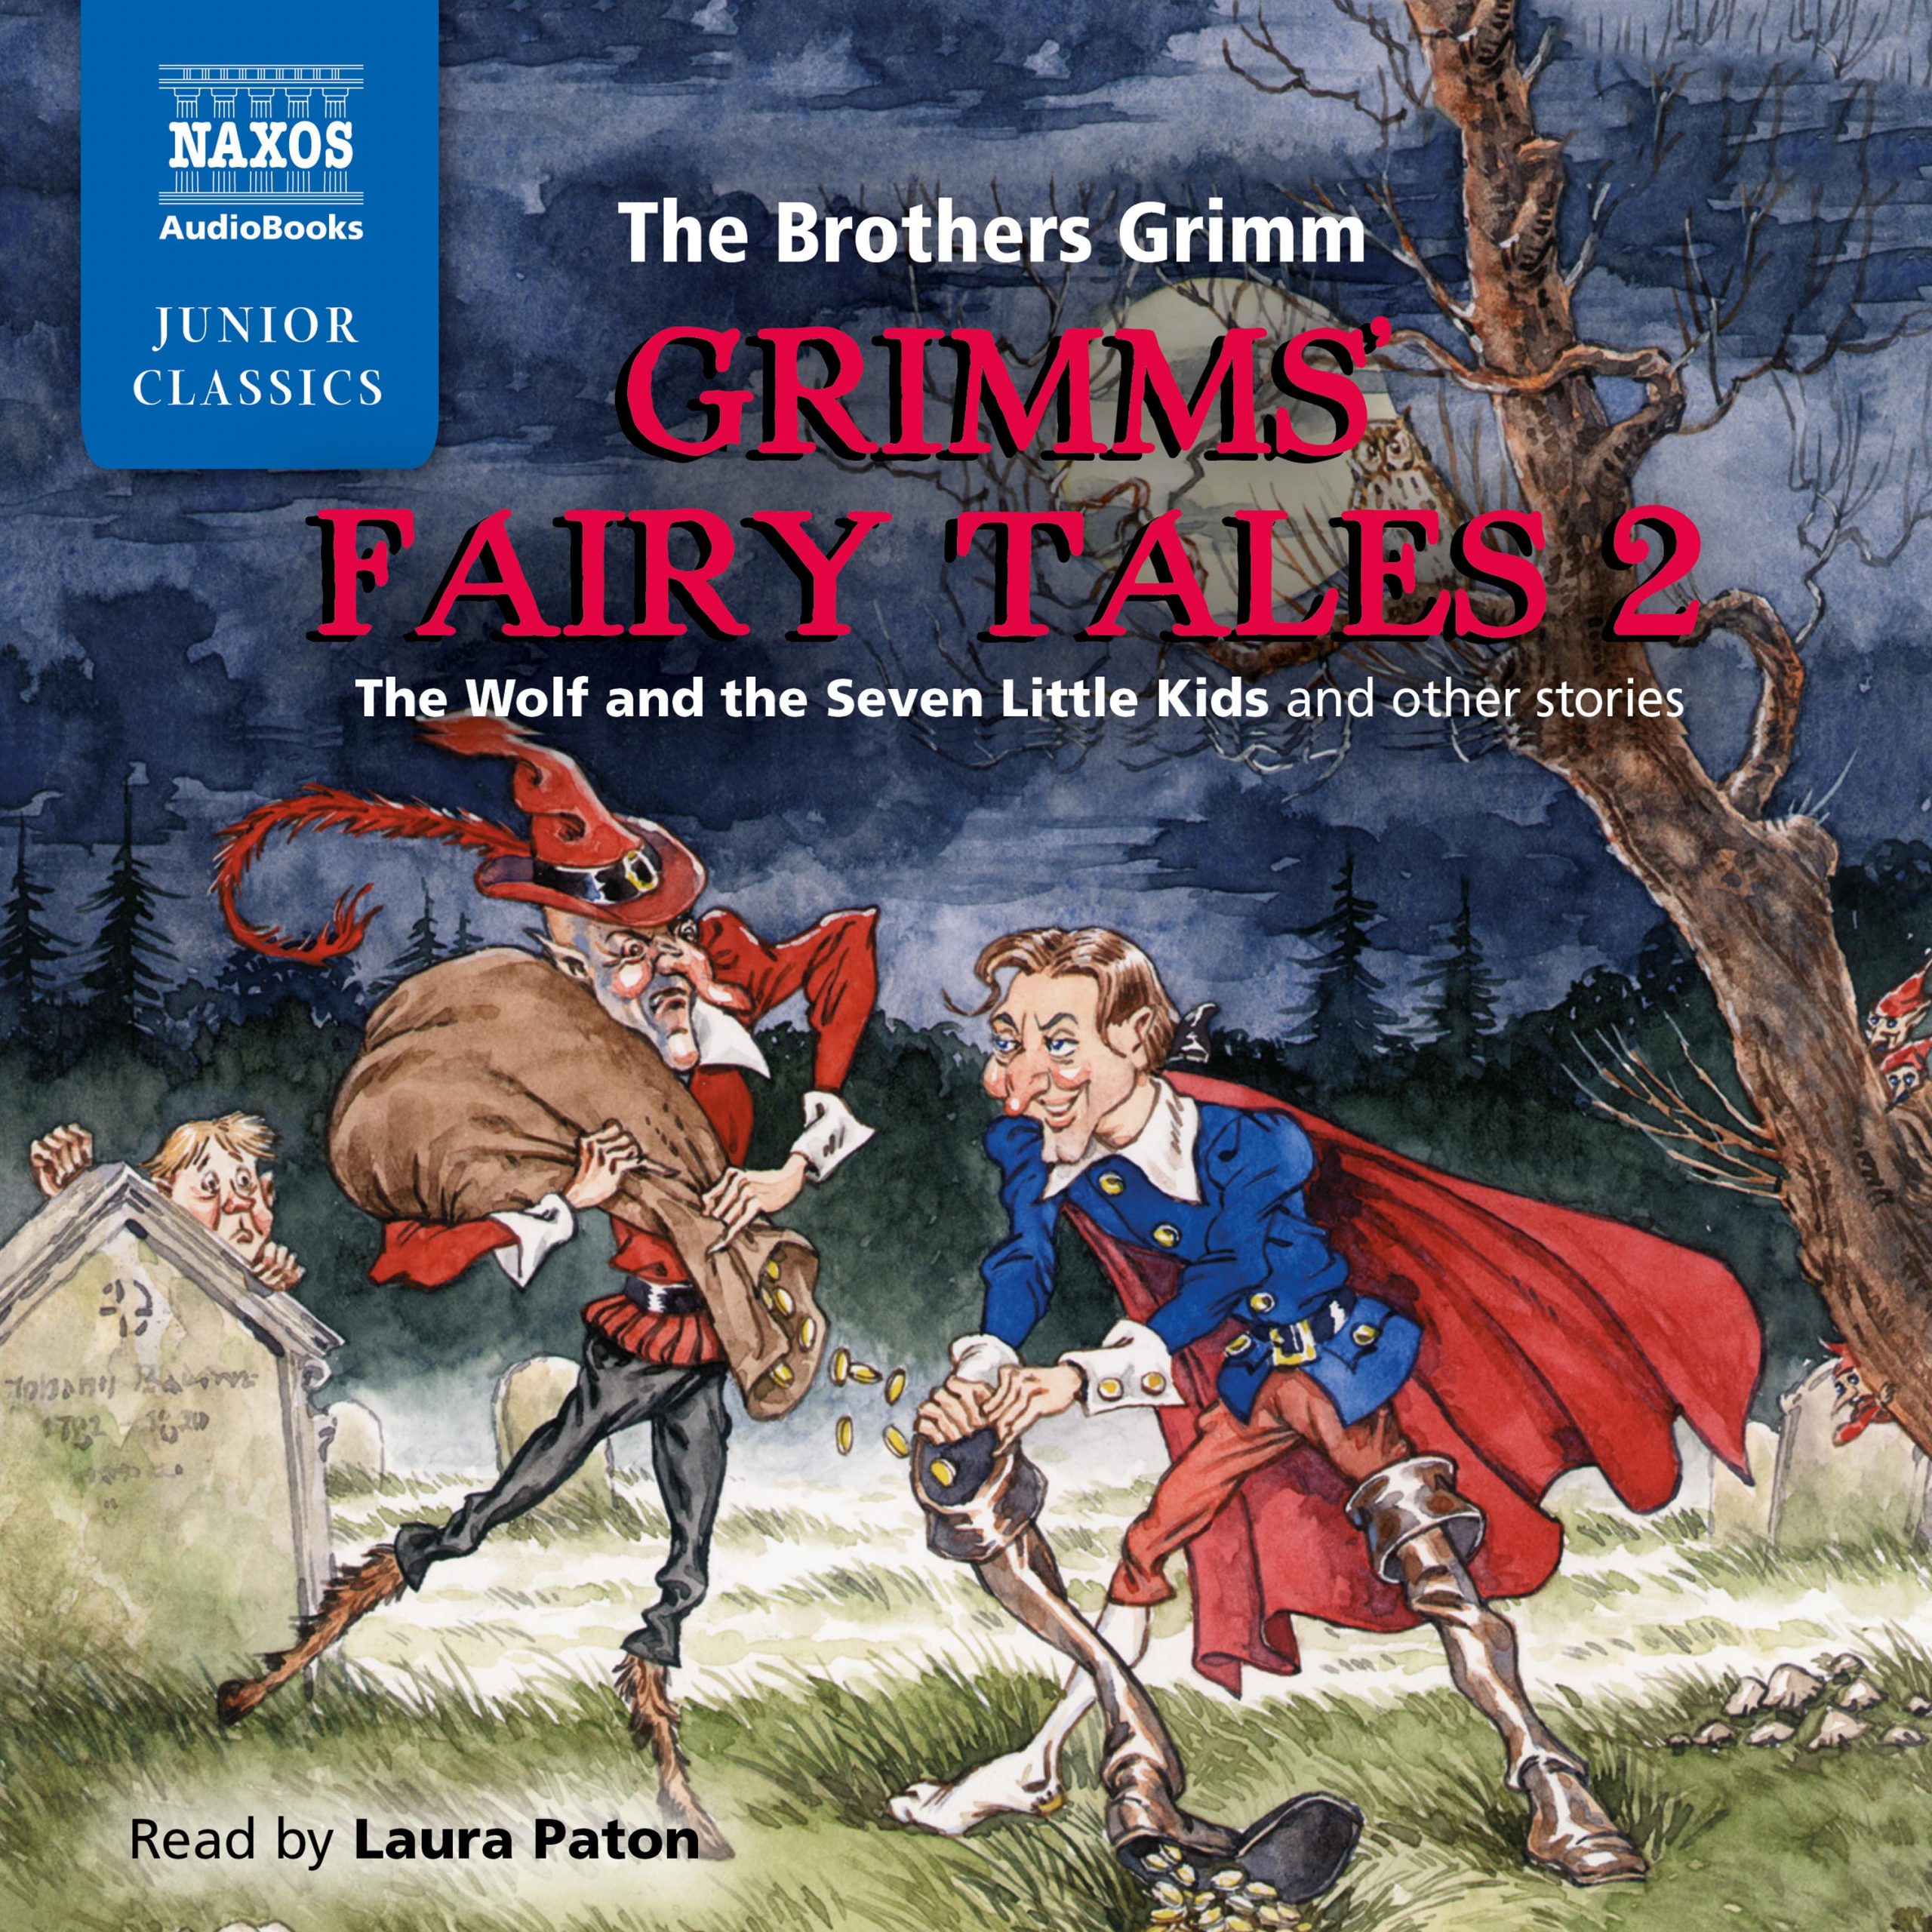 Grimms’ Fairy Tales, Volume 2 (selections)